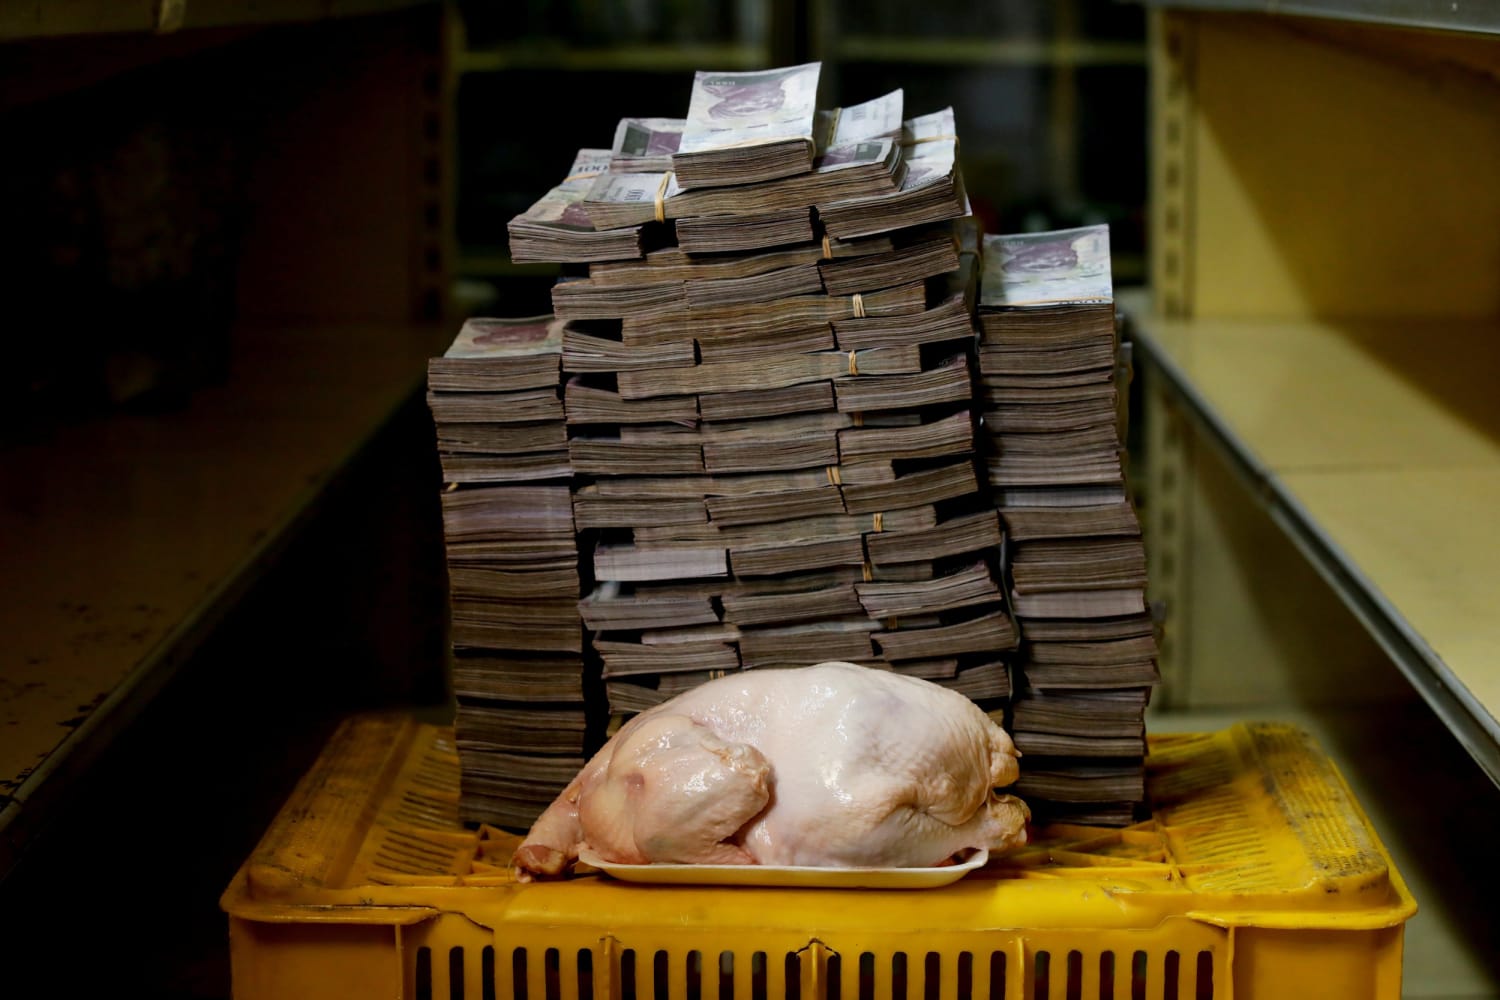 See how many bills it took to buy a chicken in Venezuela